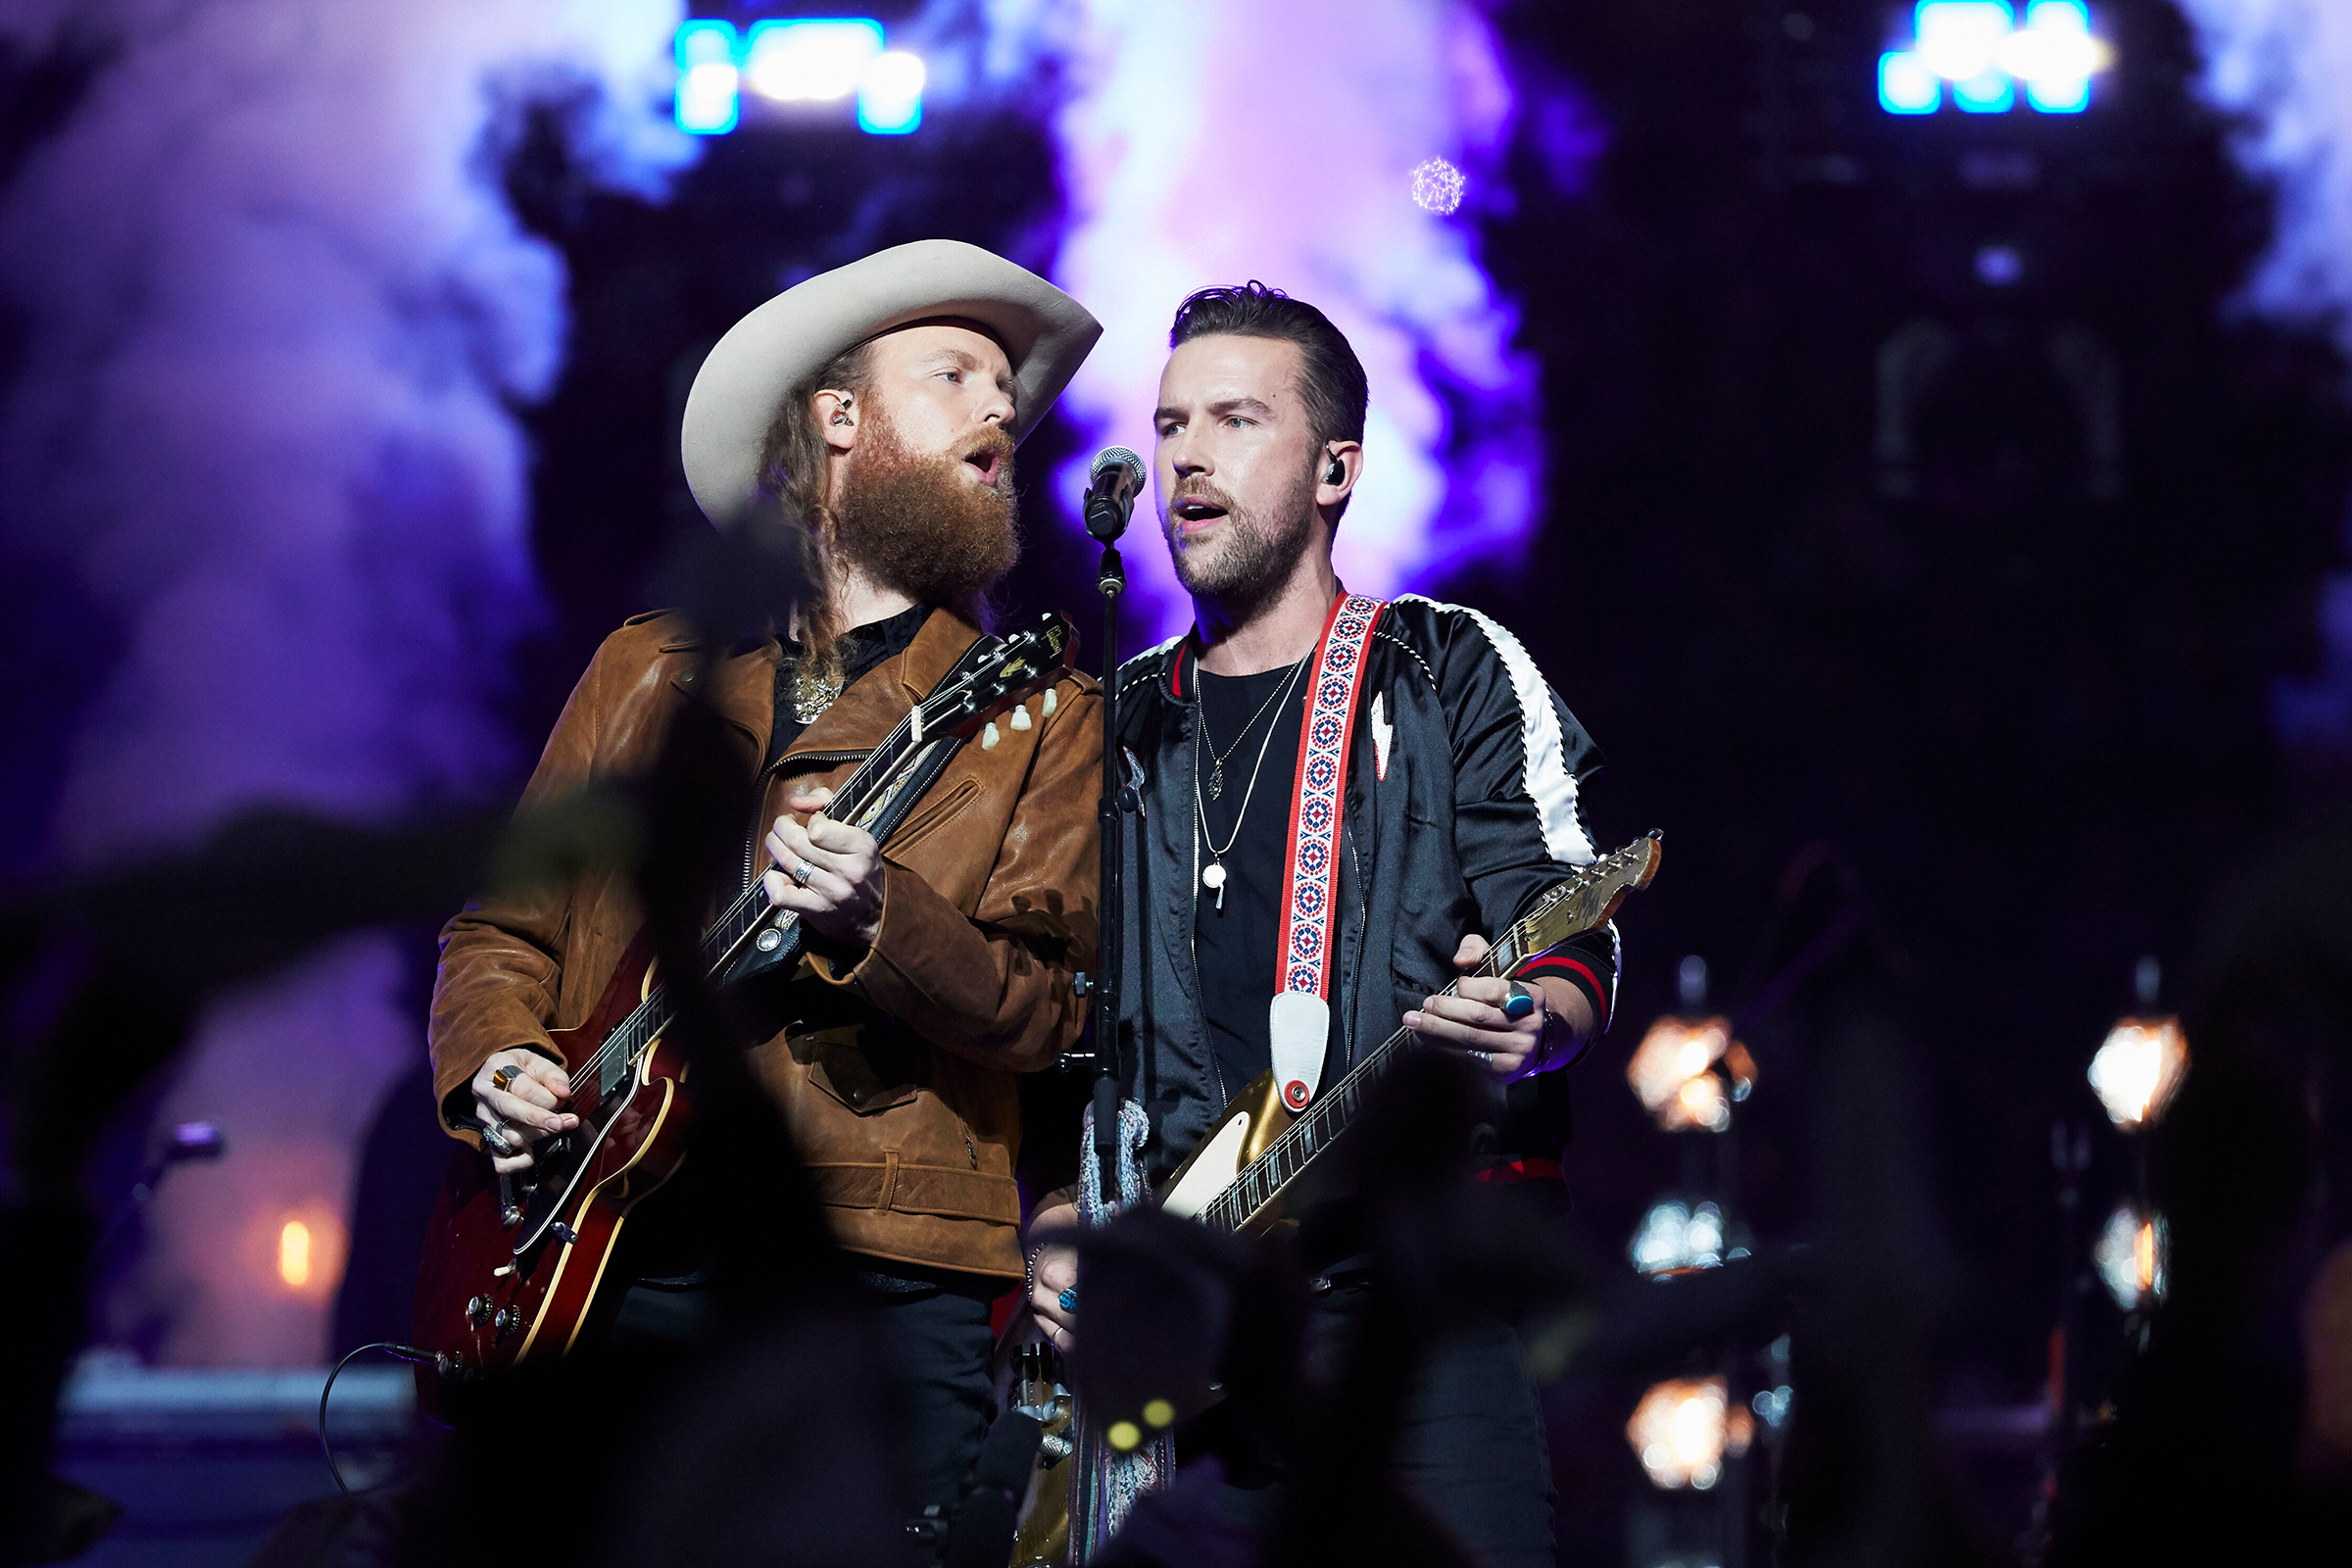 T.J., right, with his brother John, left, performing during a 2019 NFL game in Detroit (Rick Osentoski—AP)